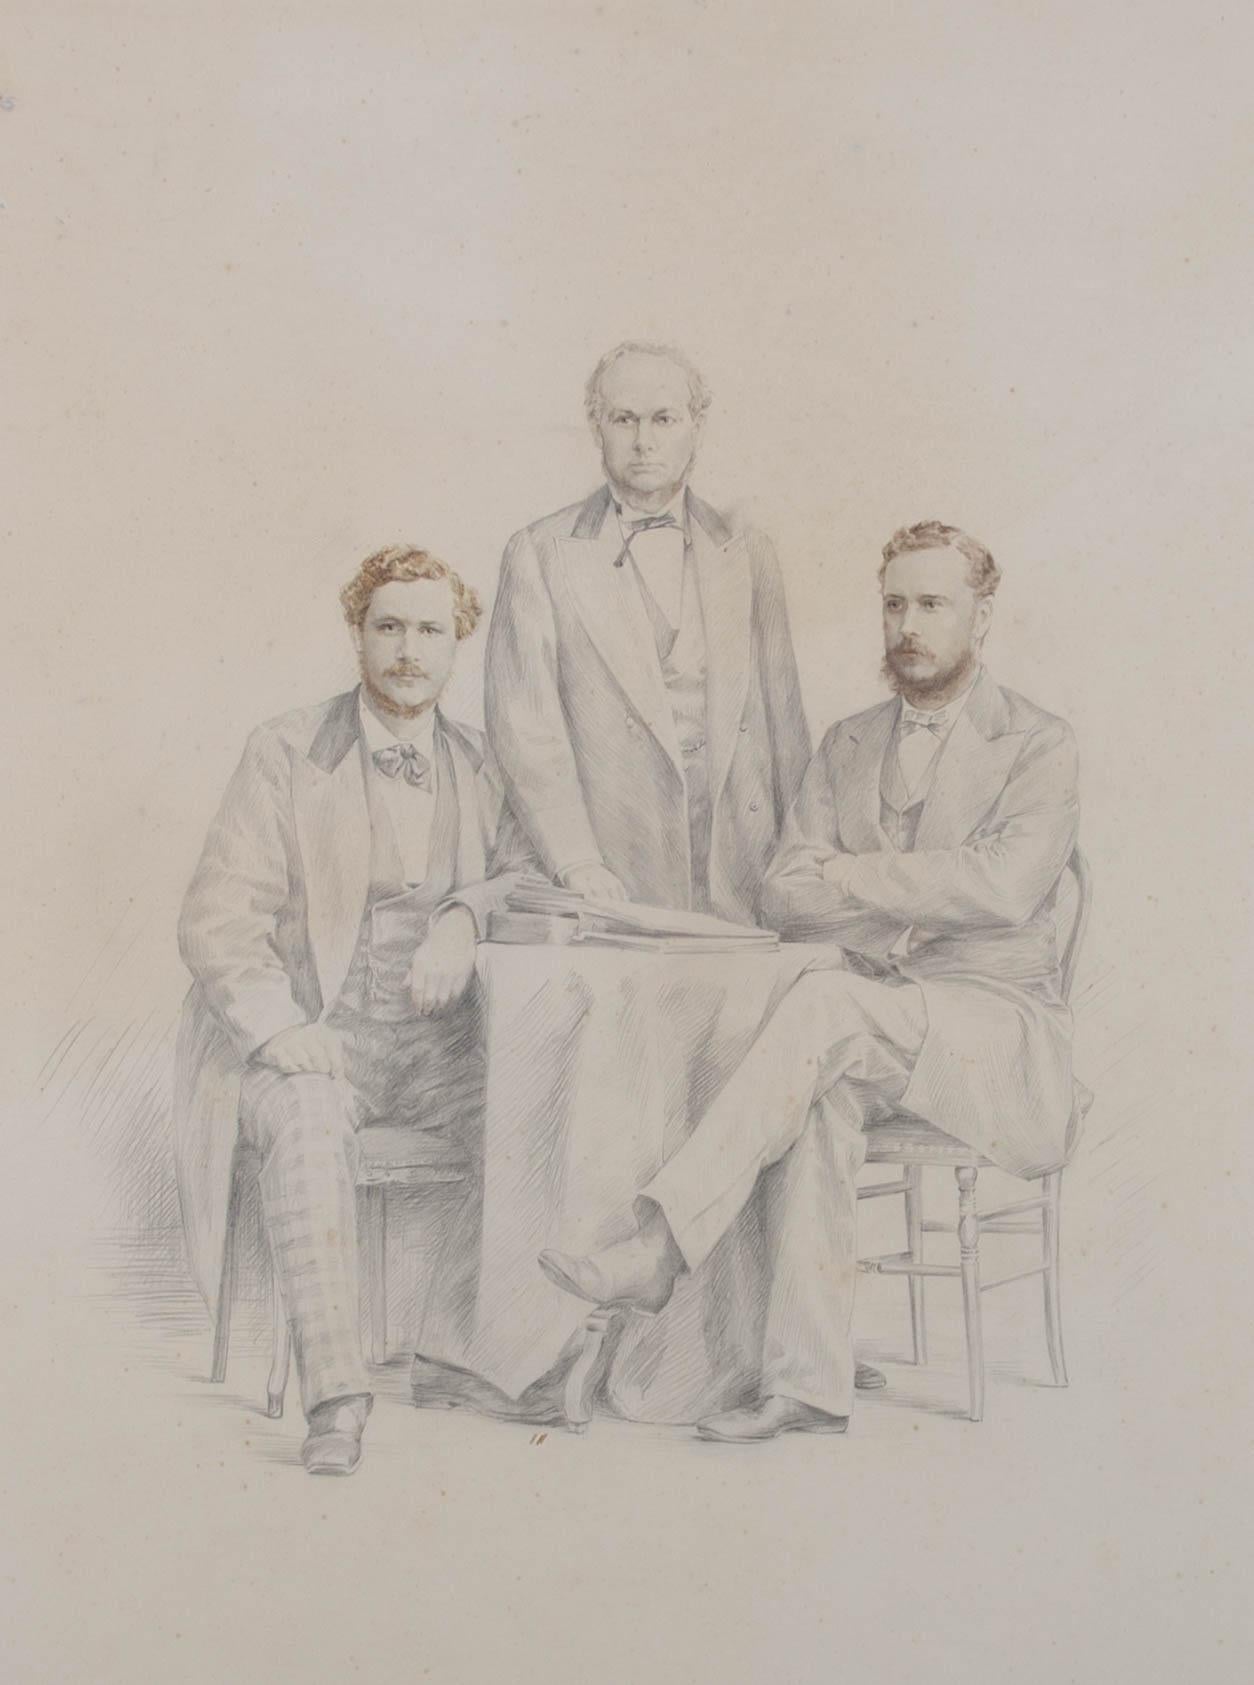 A very fine graphite drawing with incredibly delicate watercolour bodywork. The drawing shows a proud father standing between his two seated sons. All Three are handsomely dressed in the height of fashion for the 1860s. The inscription at the lower